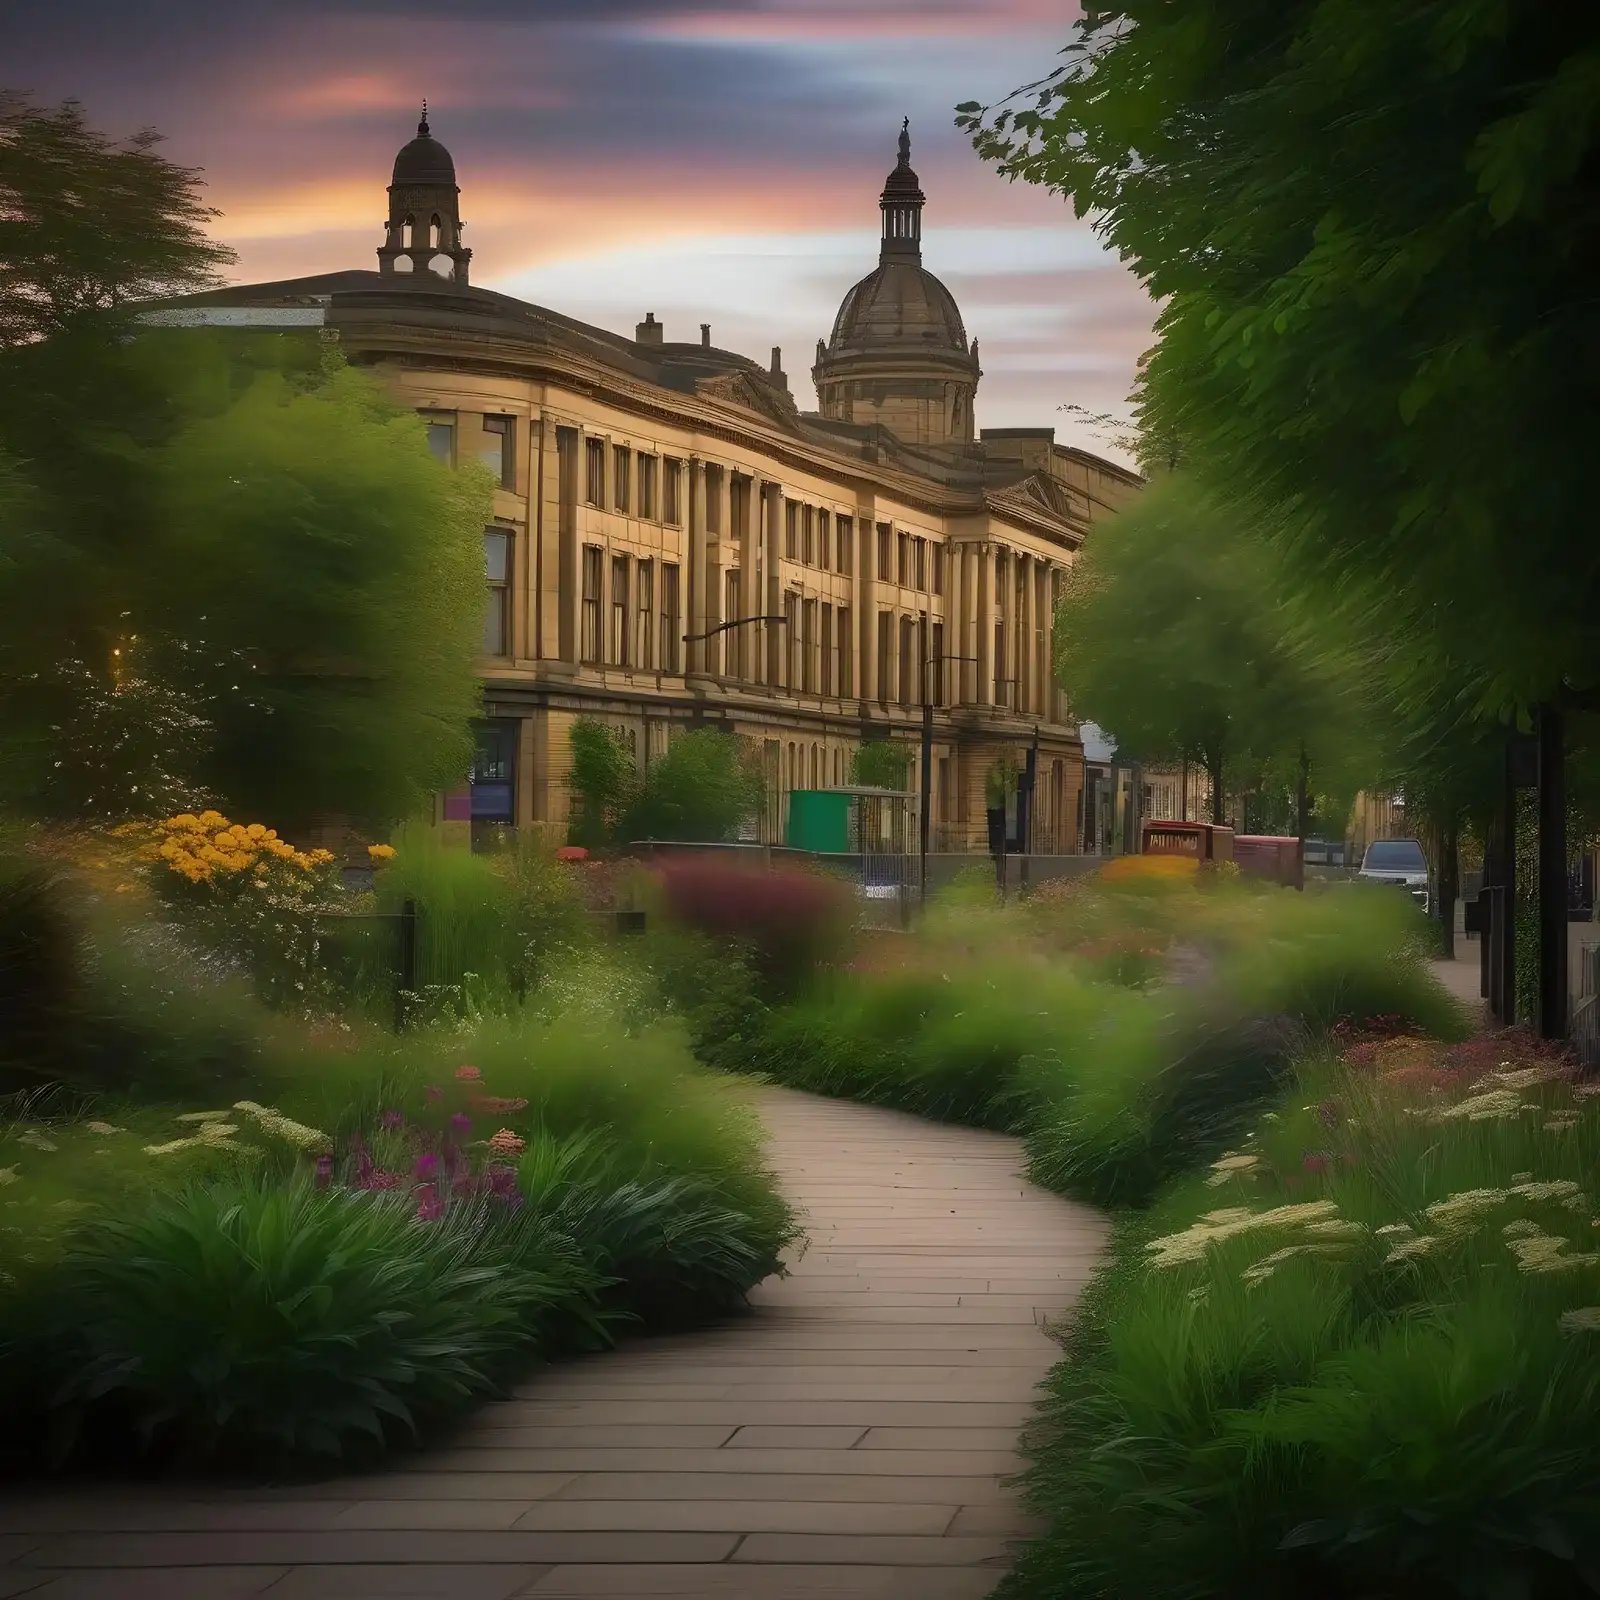 A serene path through a lush garden with historic buildings in the background at dusk.